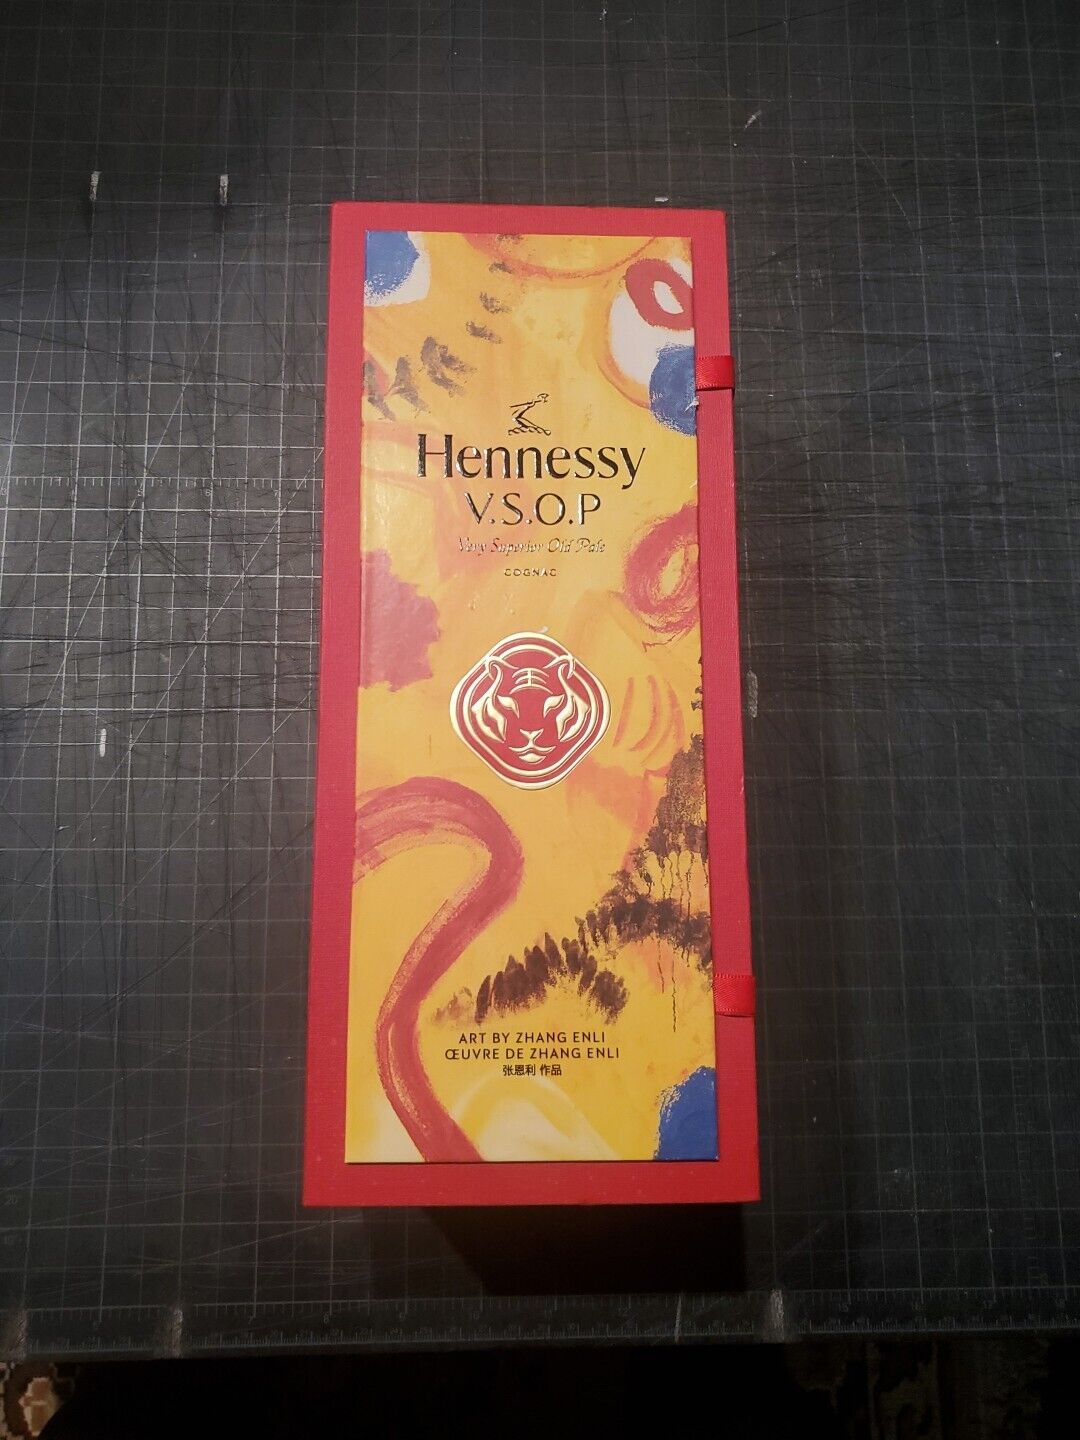 HENNESSY VSOP ART BY ZHANG HUAN 2021 EDITION YEAR OF Tiger Empty Bottle